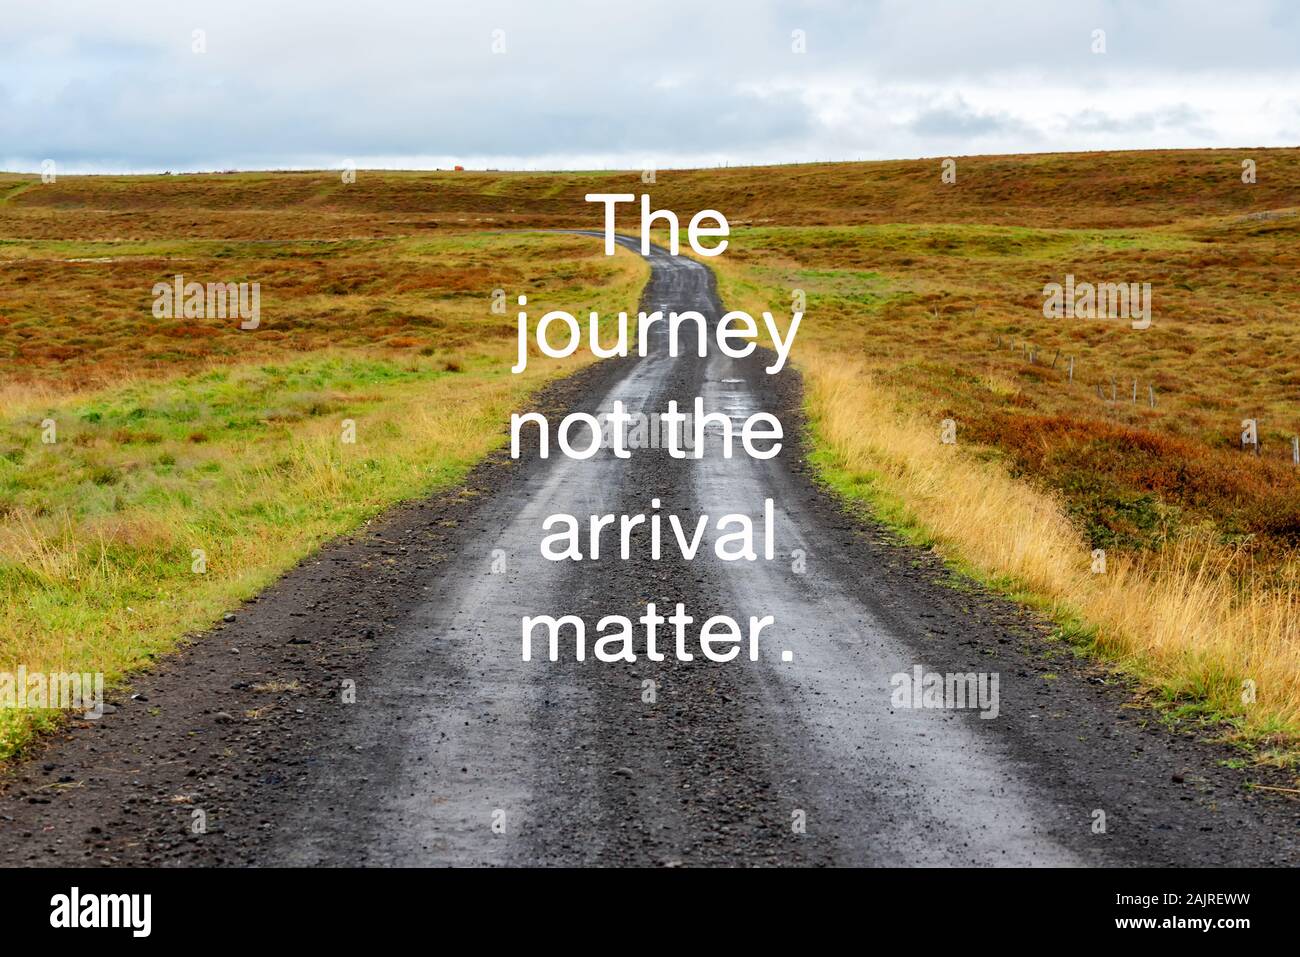 Inspirational Quotes - The journey not the arrival matter. Stock Photo